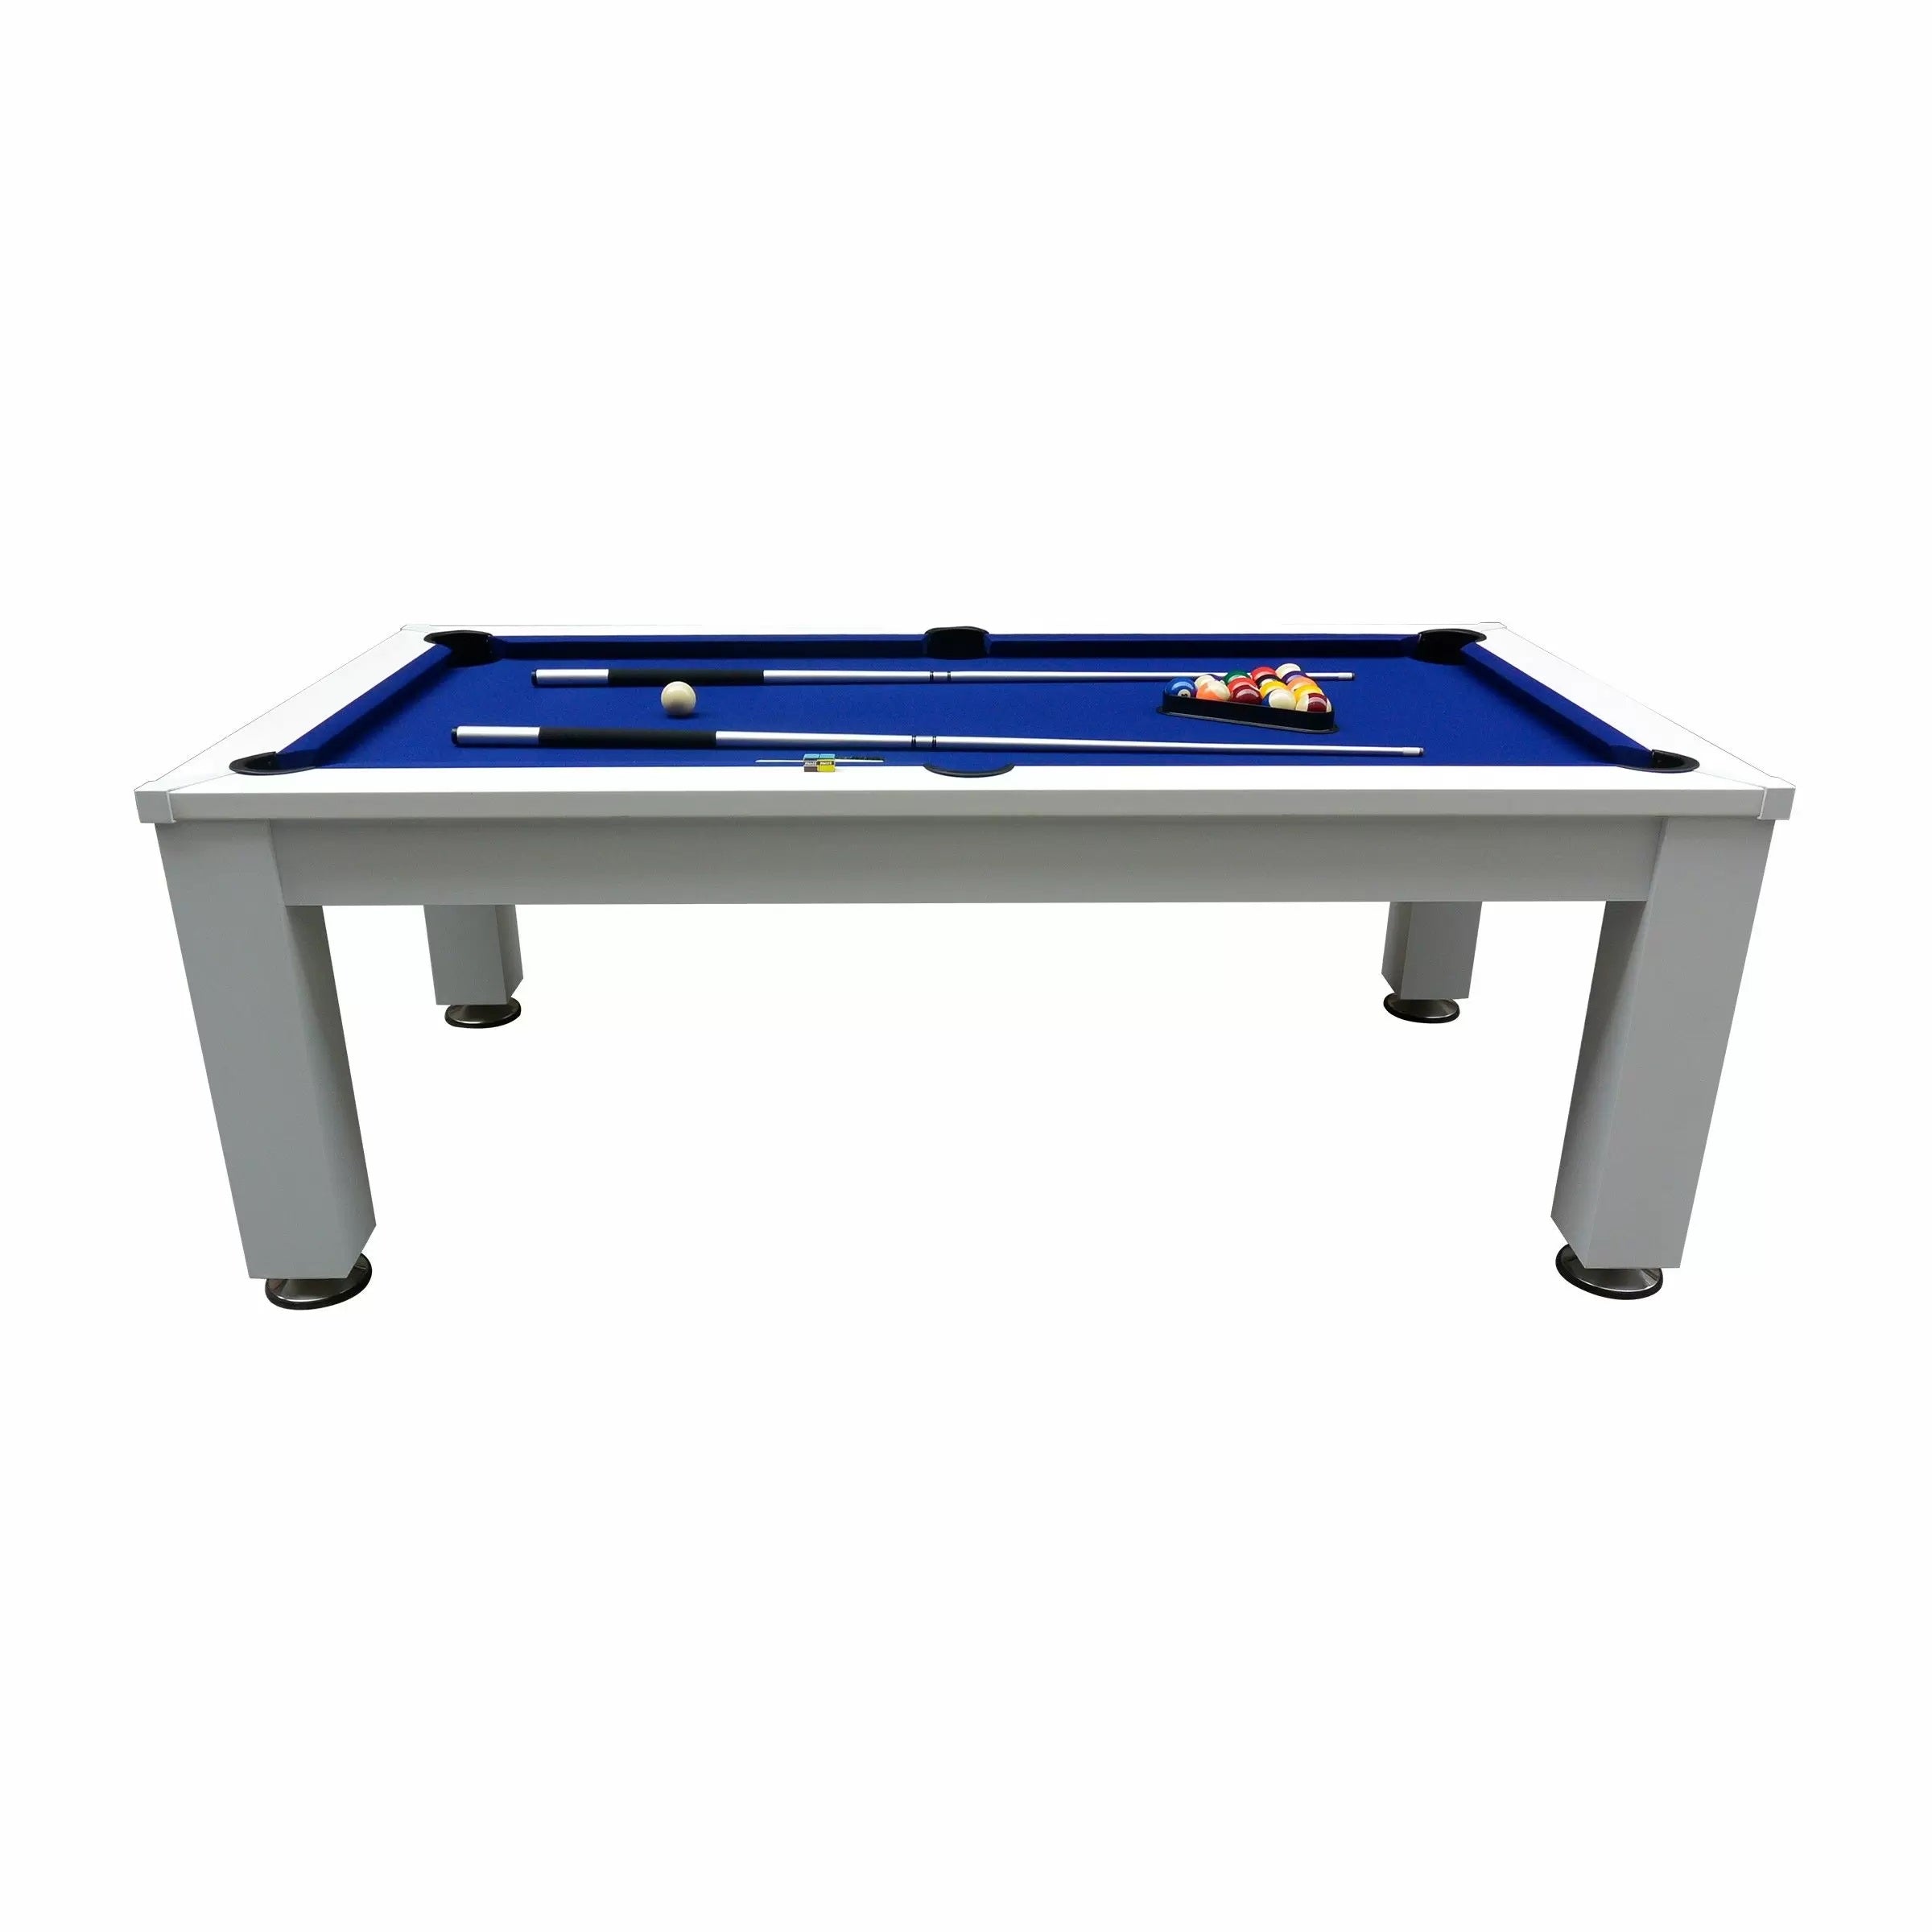 Imperial Esterno Outdoor Pool Table side angle